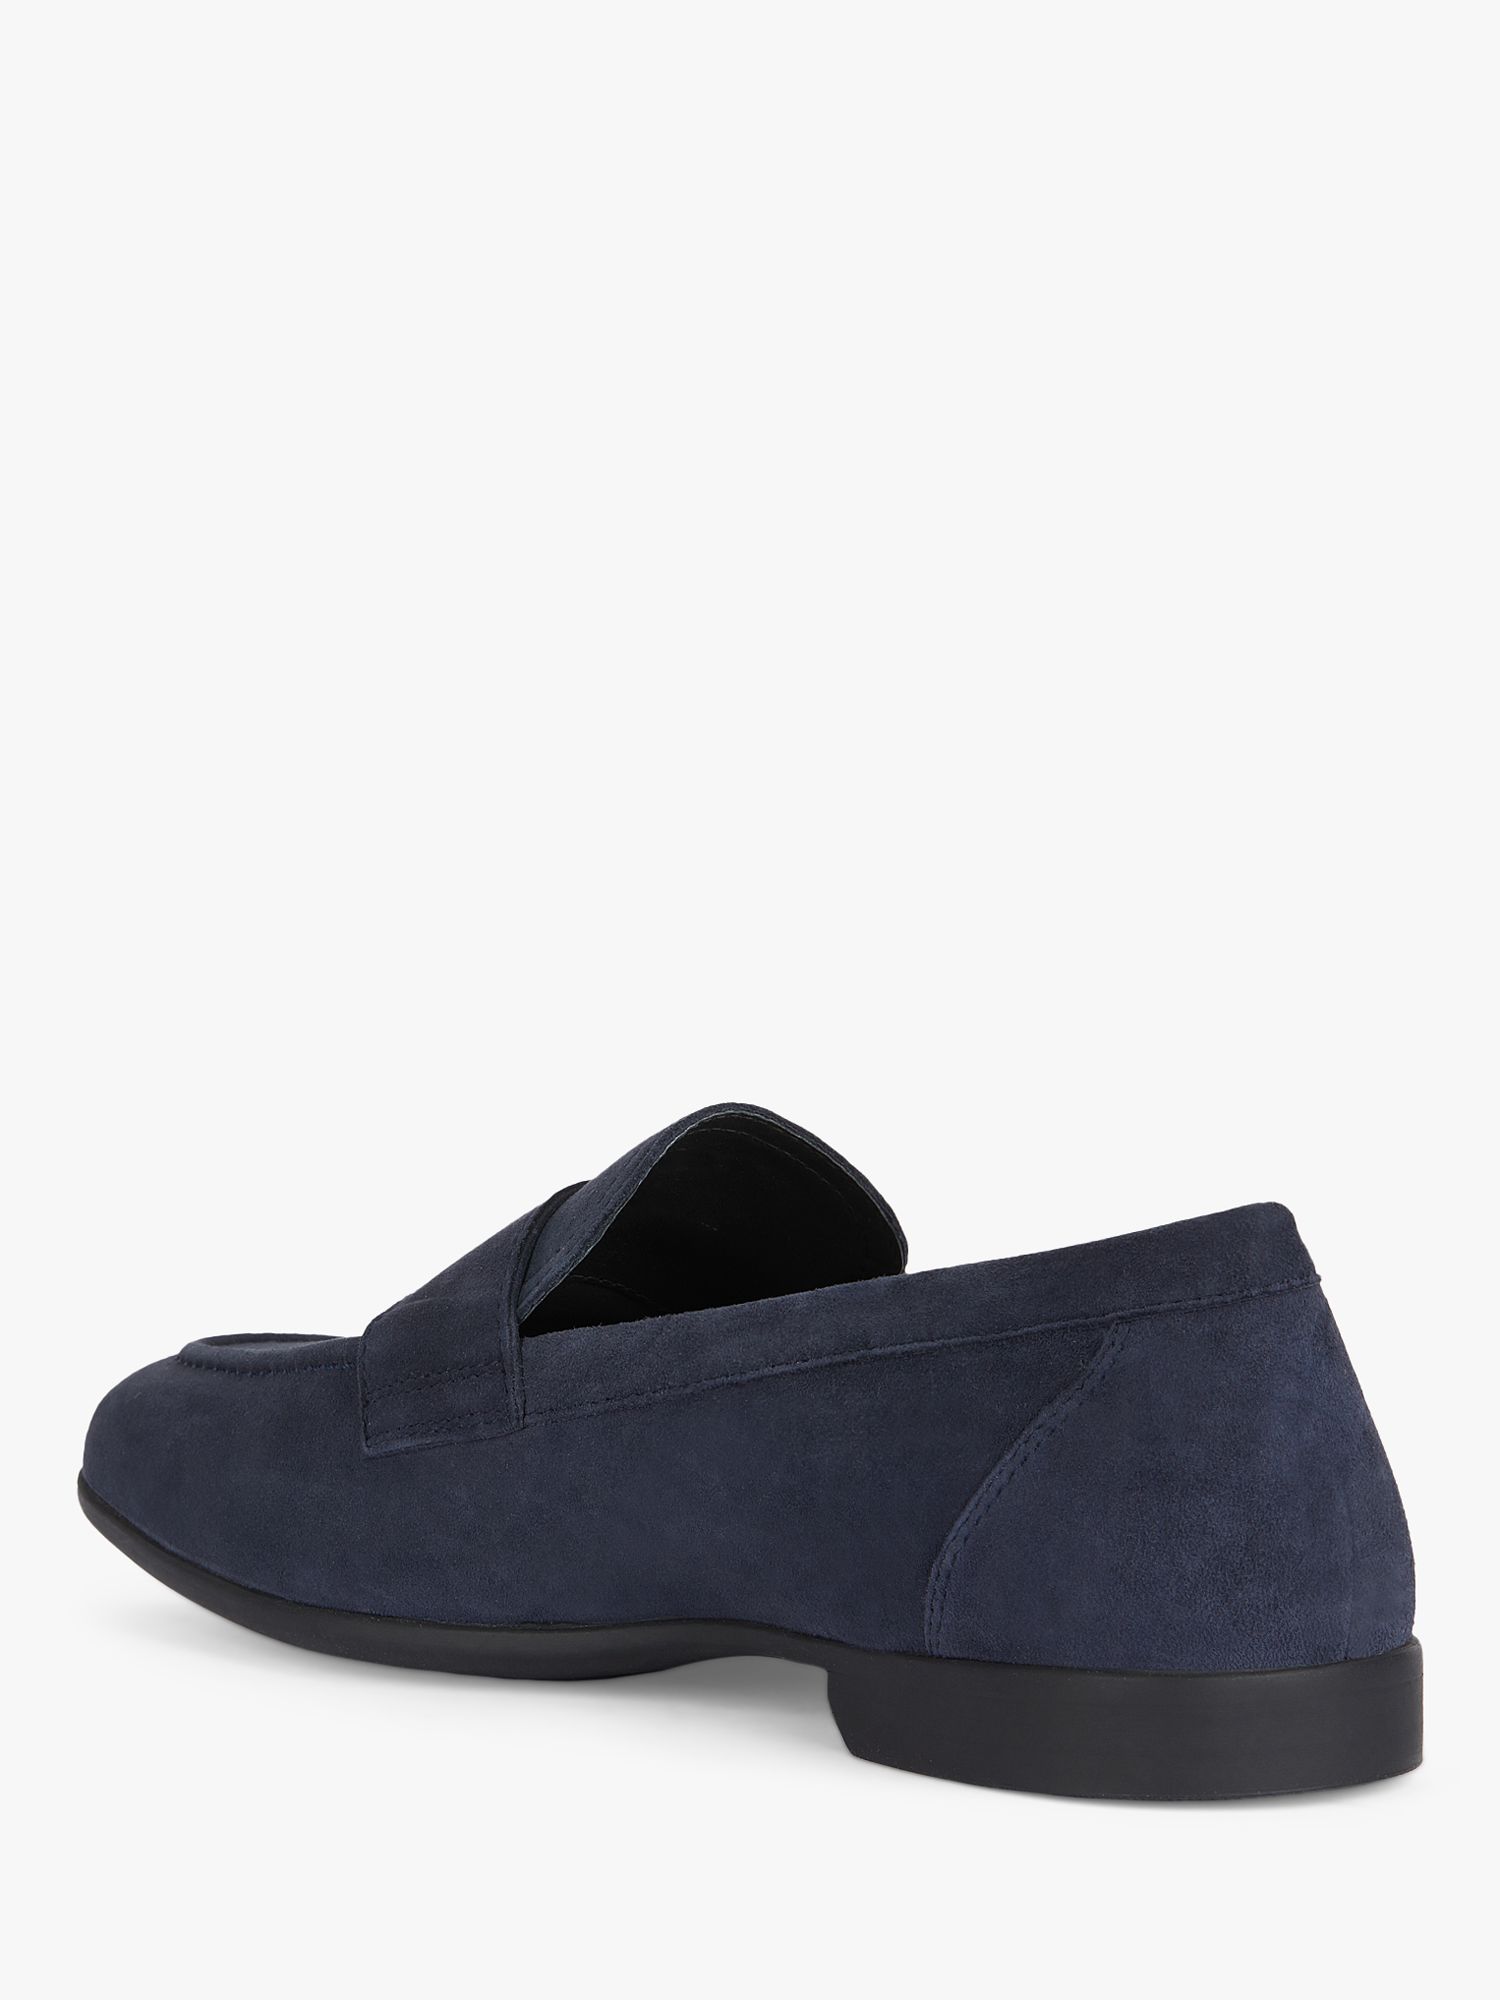 Buy Geox Sapienza Classic Loafers Online at johnlewis.com